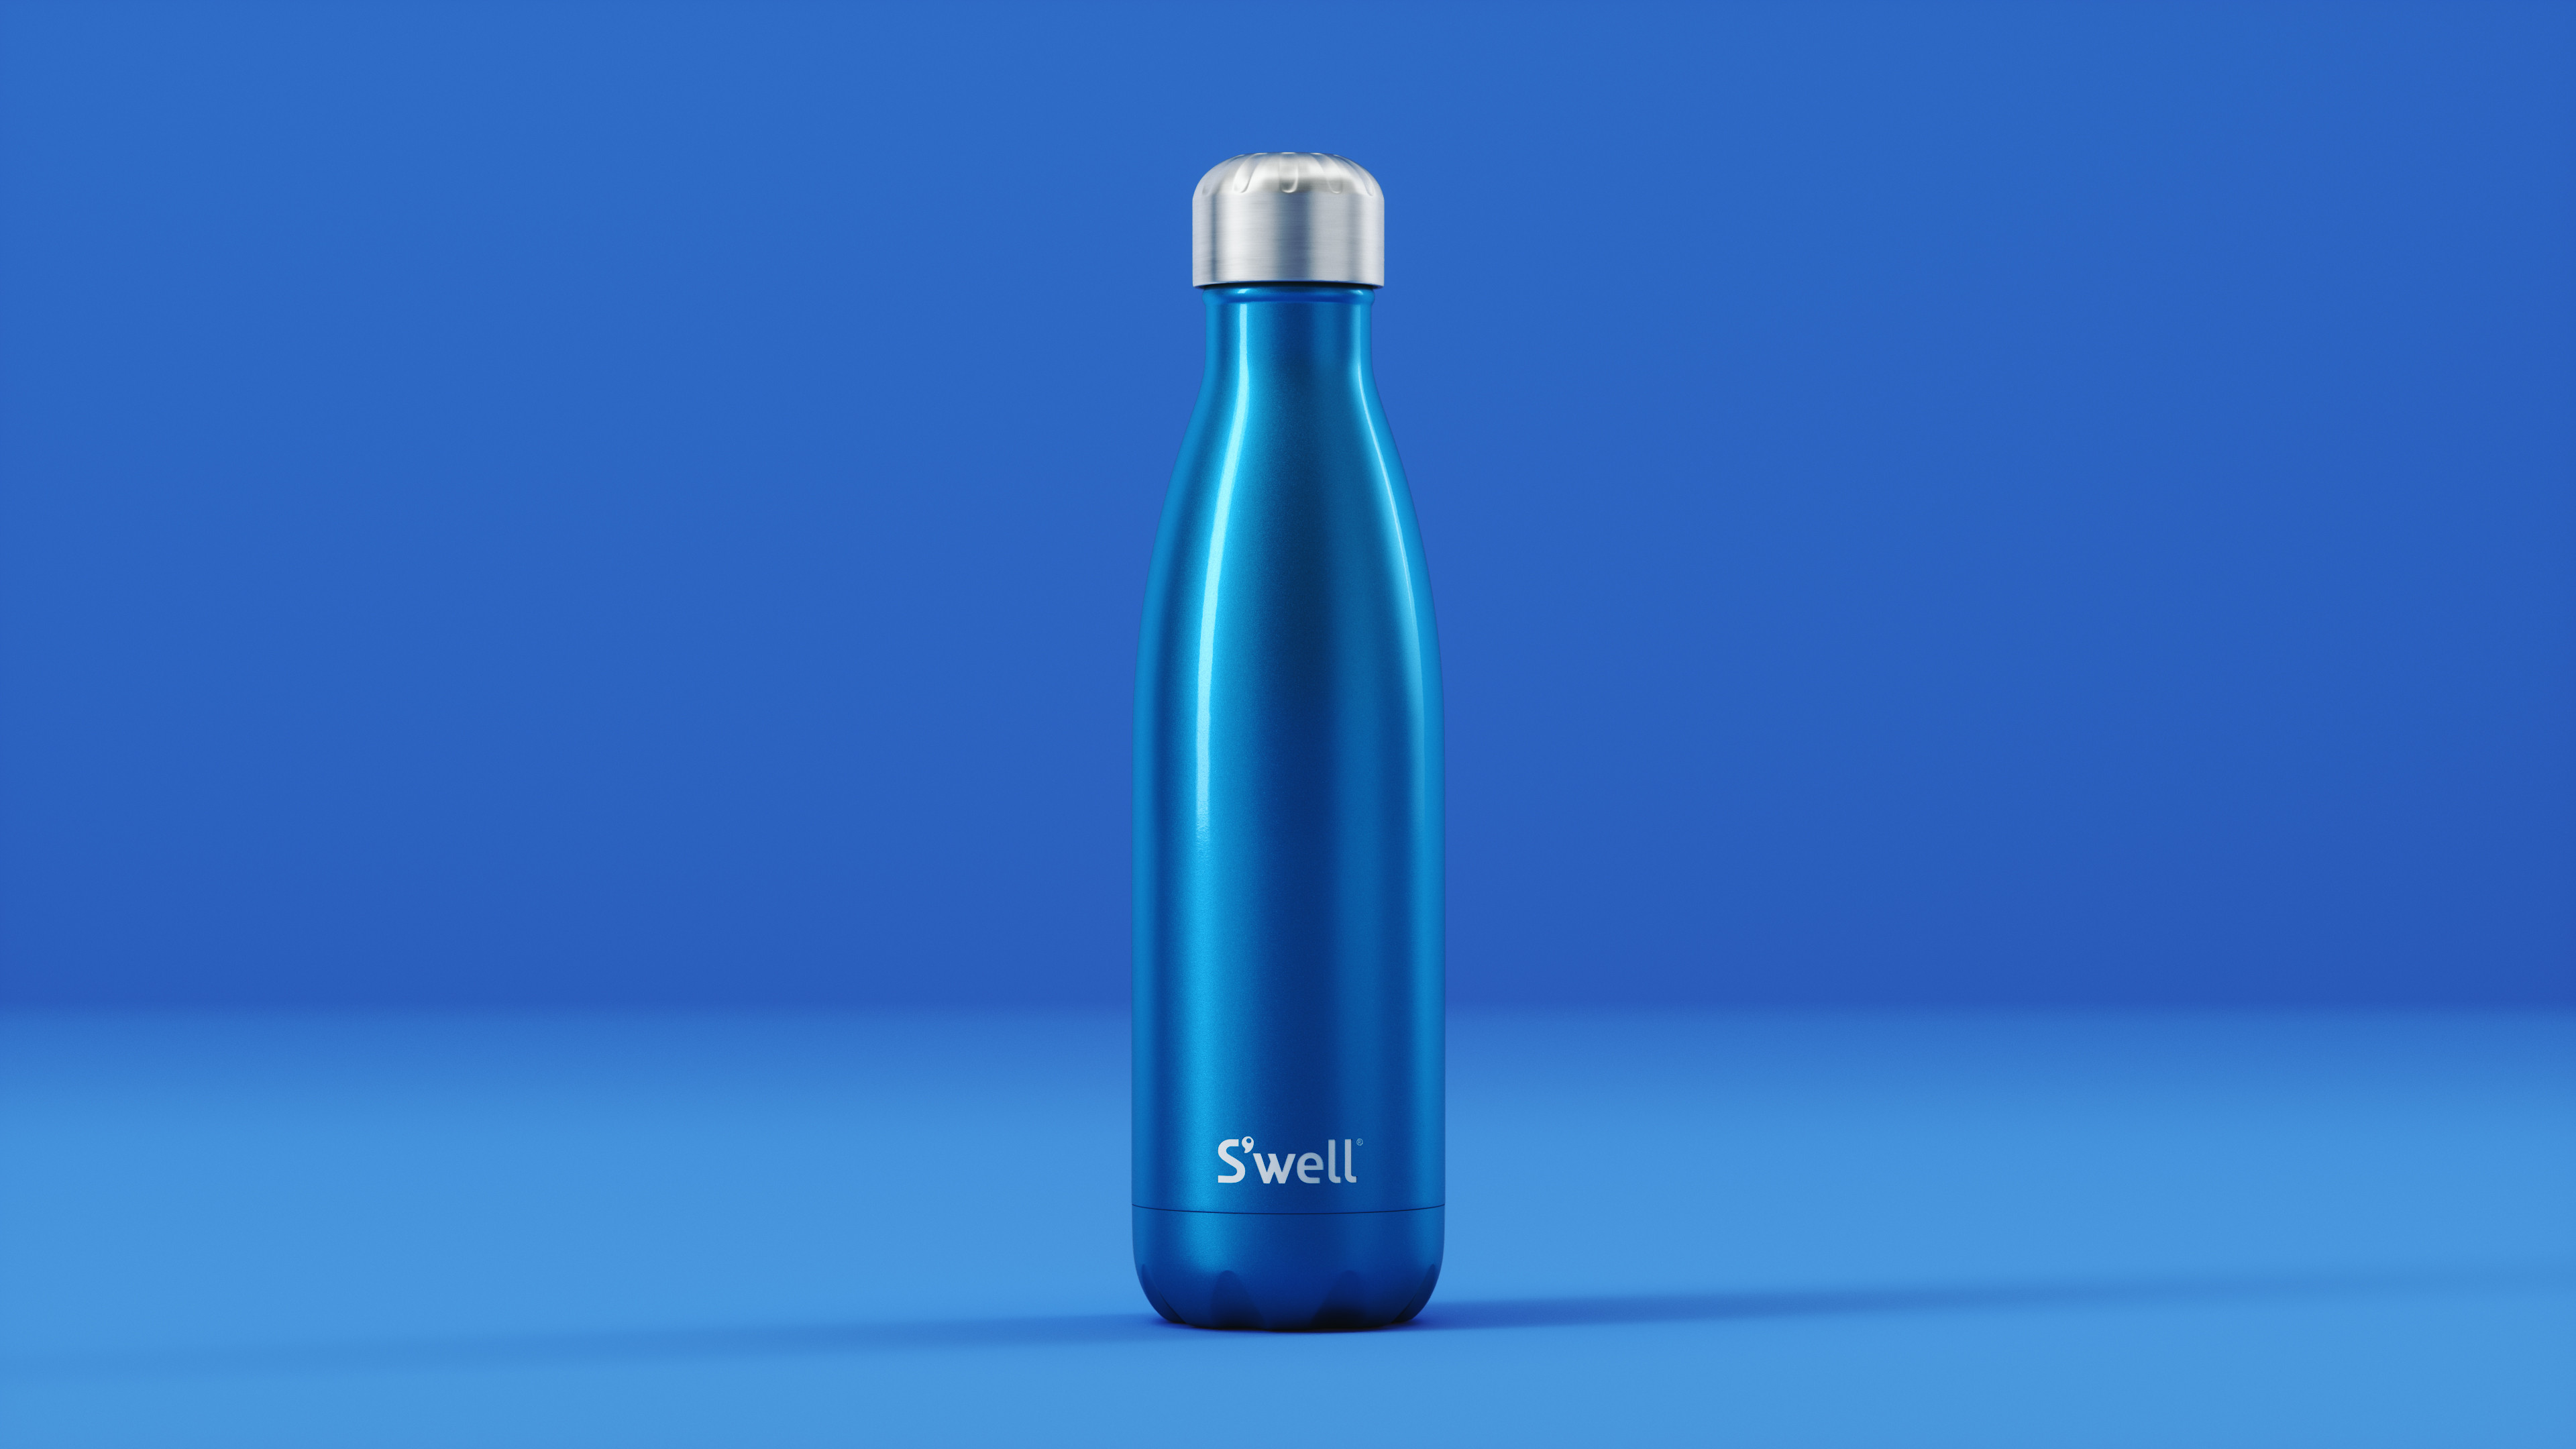 S'well 25oz Stainless Steel Water Bottle: Blue Suede